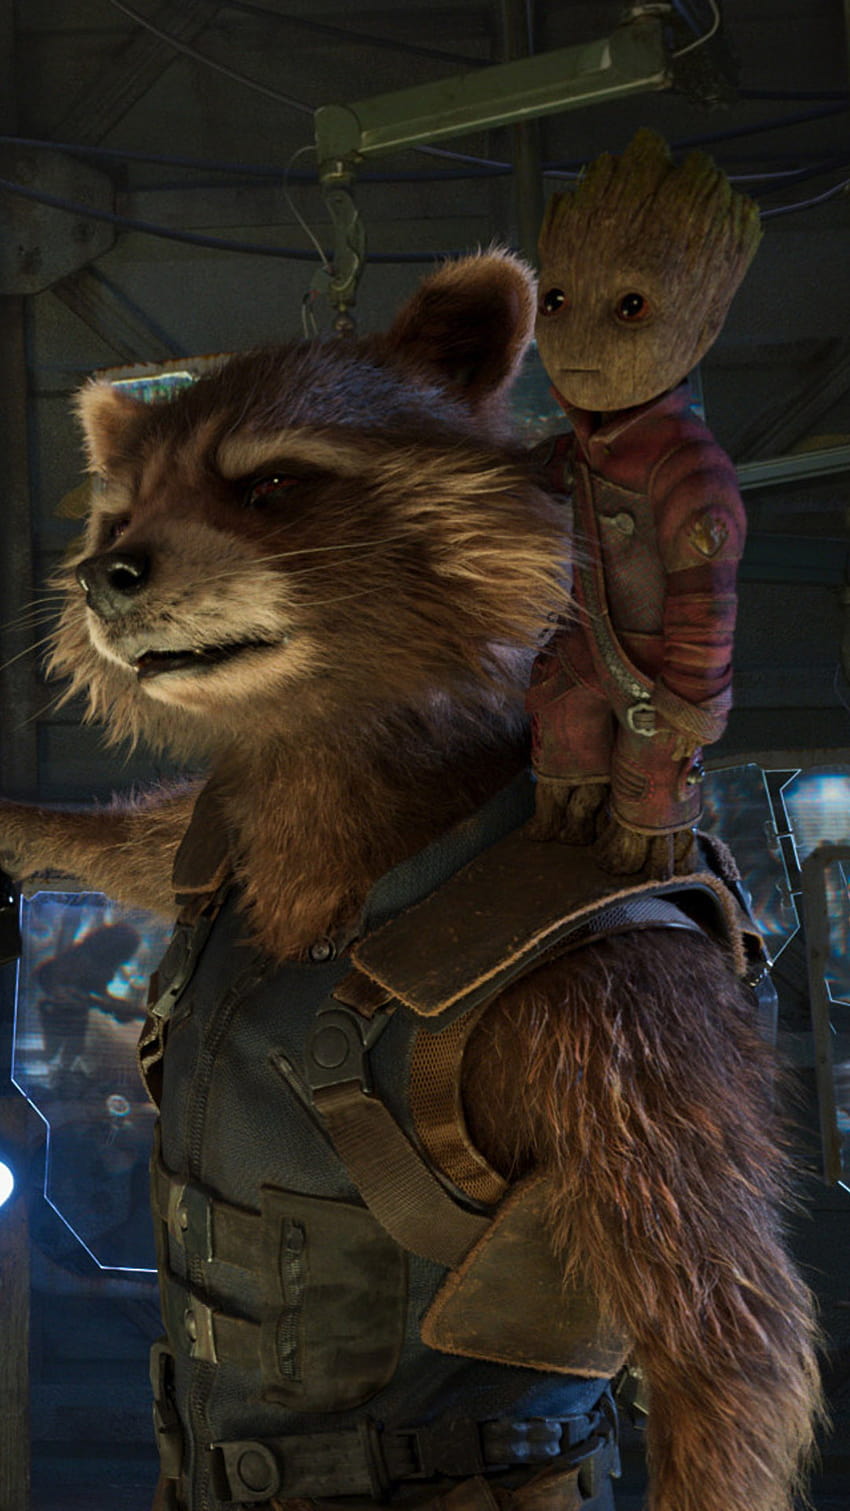 1080x1920 Baby Groot And Rocket Raccoon In Guardians of the Galaxy Vol 2 Iphone 7,6s,6 Plus, Pixel xl ,One Plus 3,3t,5 , Backgrounds, and HD phone wallpaper